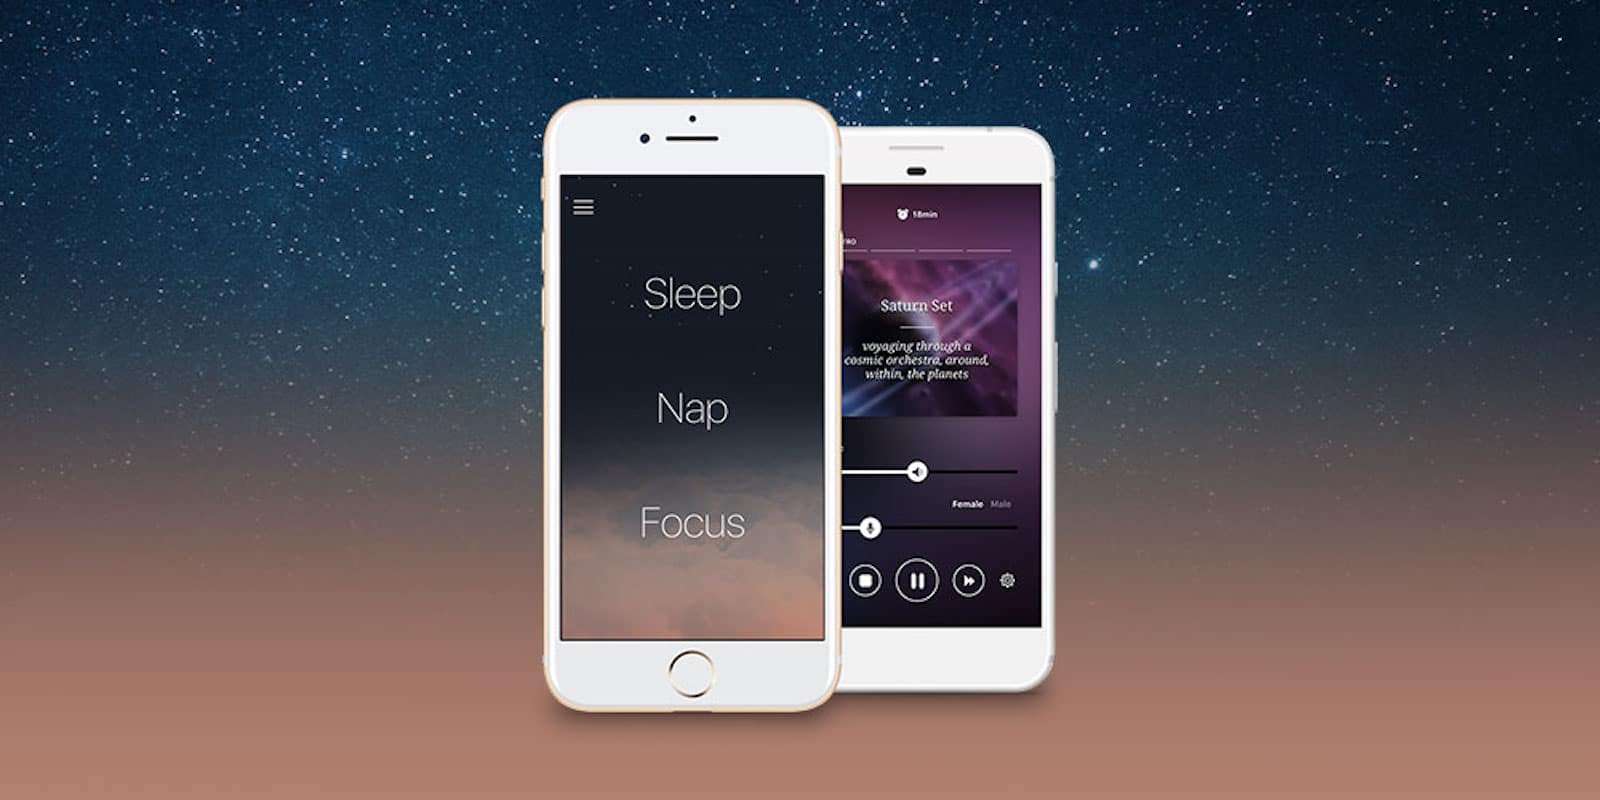 This app uses psychoacoustic research to deliver a sleep soundtrack that ensures better rest.